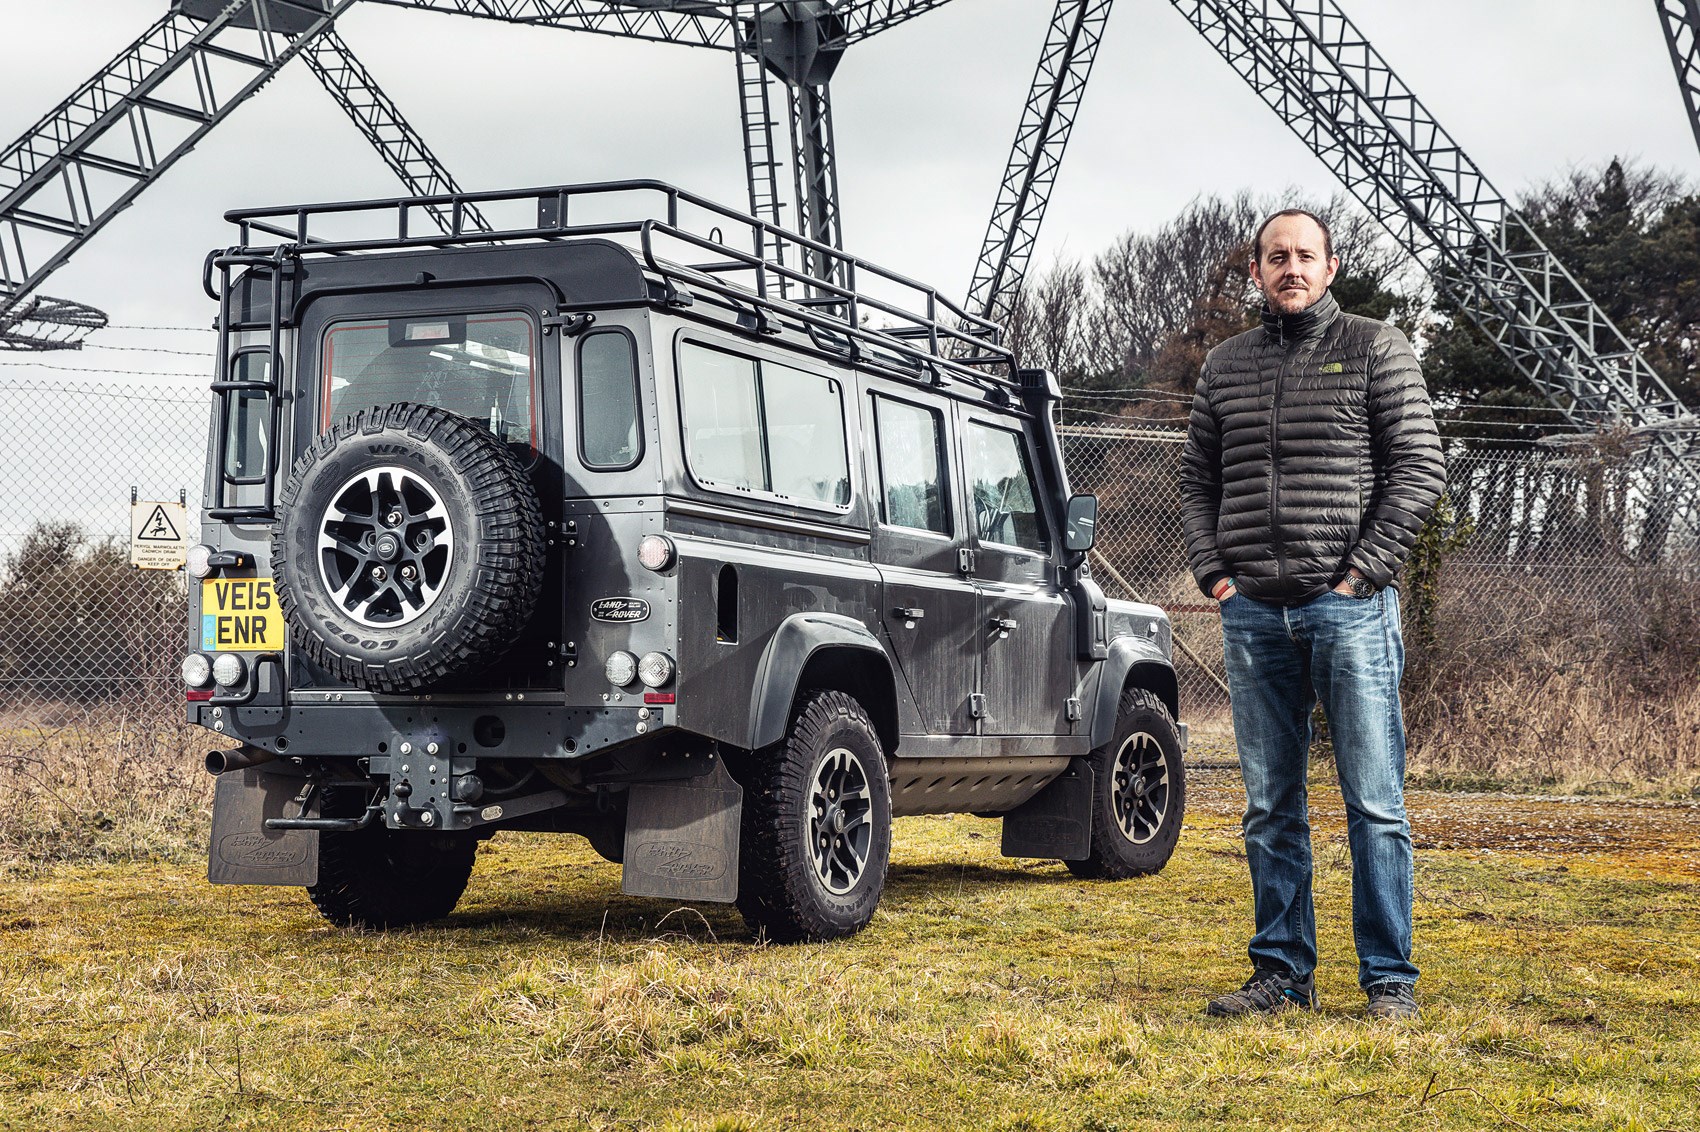 Why everyone wants a classic Land Rover